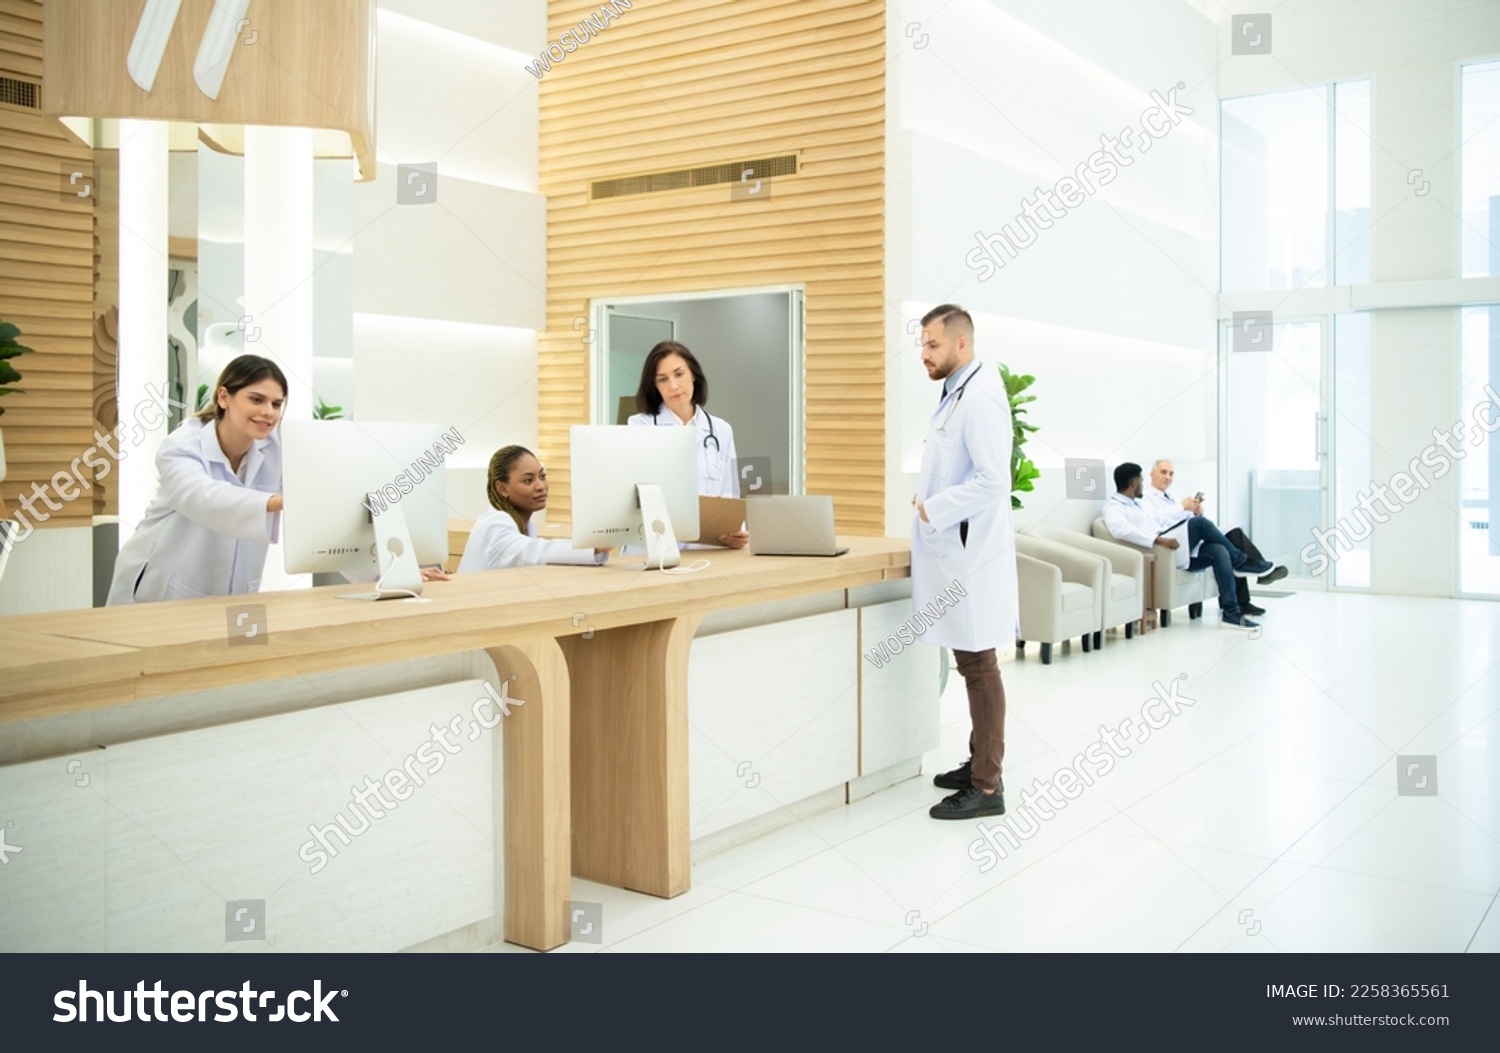 The hospital's medical ensemble will sit and converse, exchange ideas, and rest in the doctor's resting room. before launching the following mission #2258365561